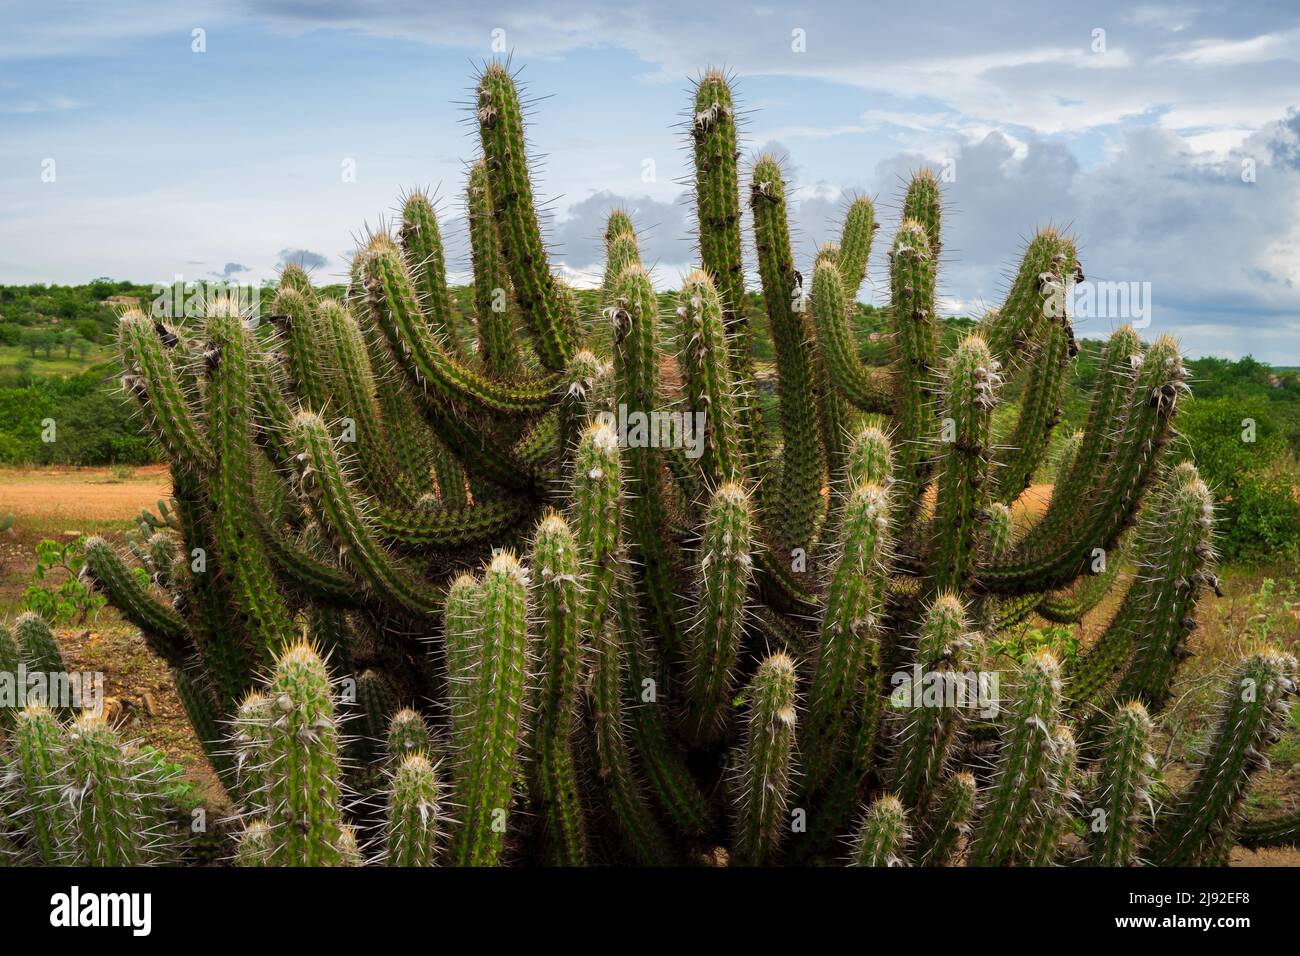 xique-xique or sprawling cactus in the caatinga, typical vegetation of northeastern brazil Stock Photo